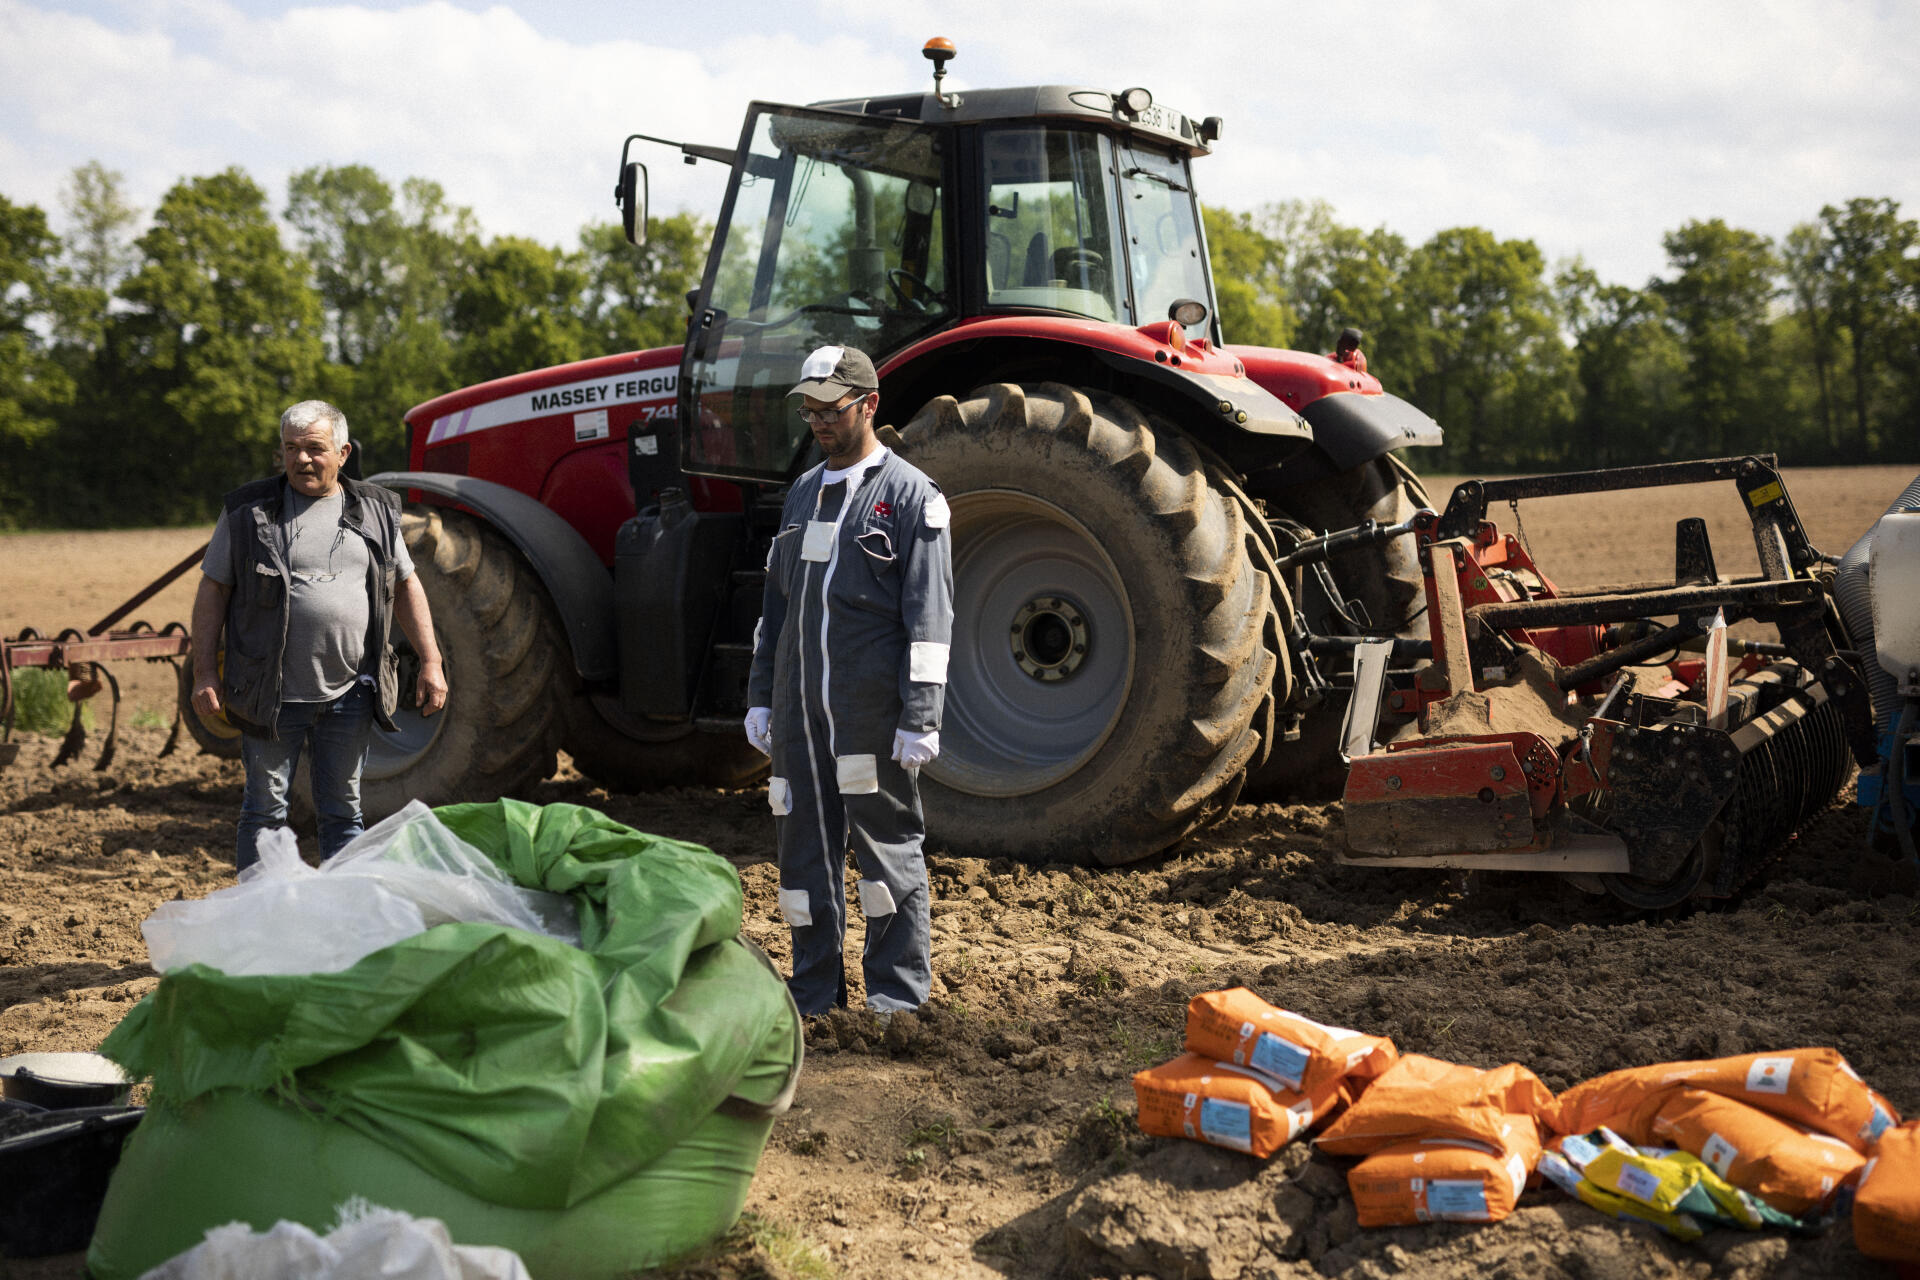 Jean-Baptiste Lefoulon is taking part in the « Pestexpo » study. He farms with his father Didier, on the left of the photo. Lingèvres (Calvados), 28 May 2021.